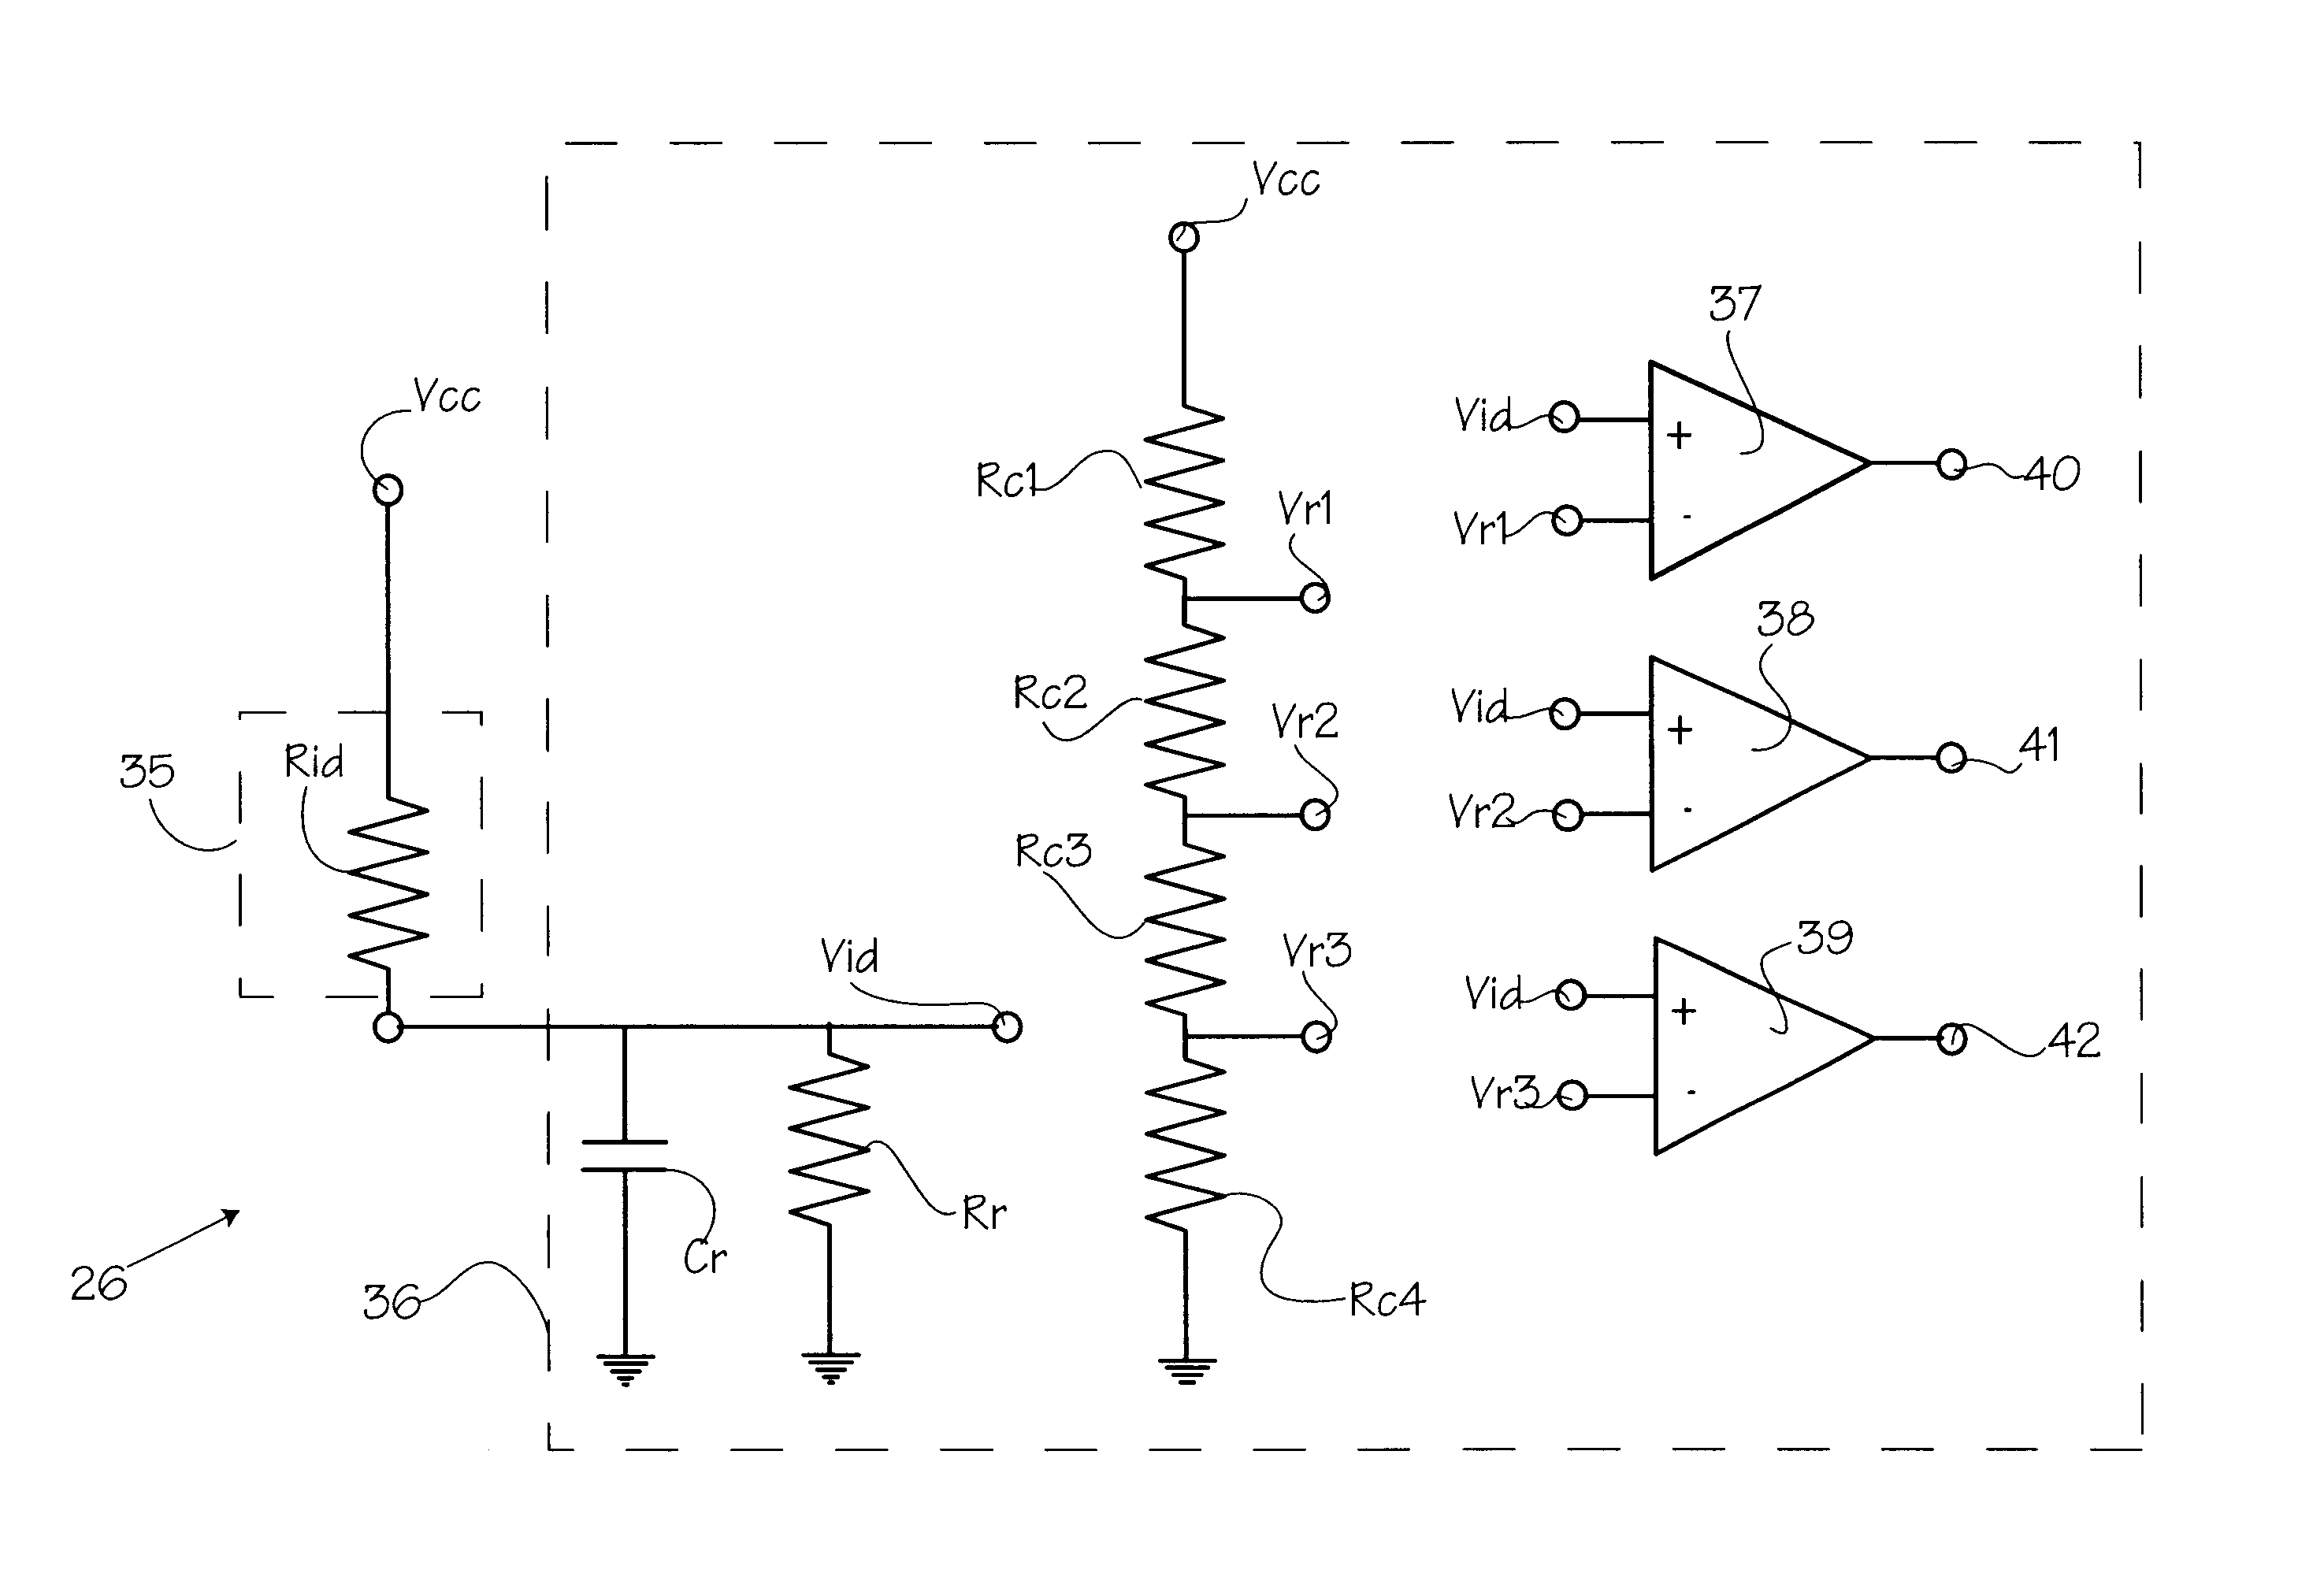 Power supply for identification and control of electrical surgical tools